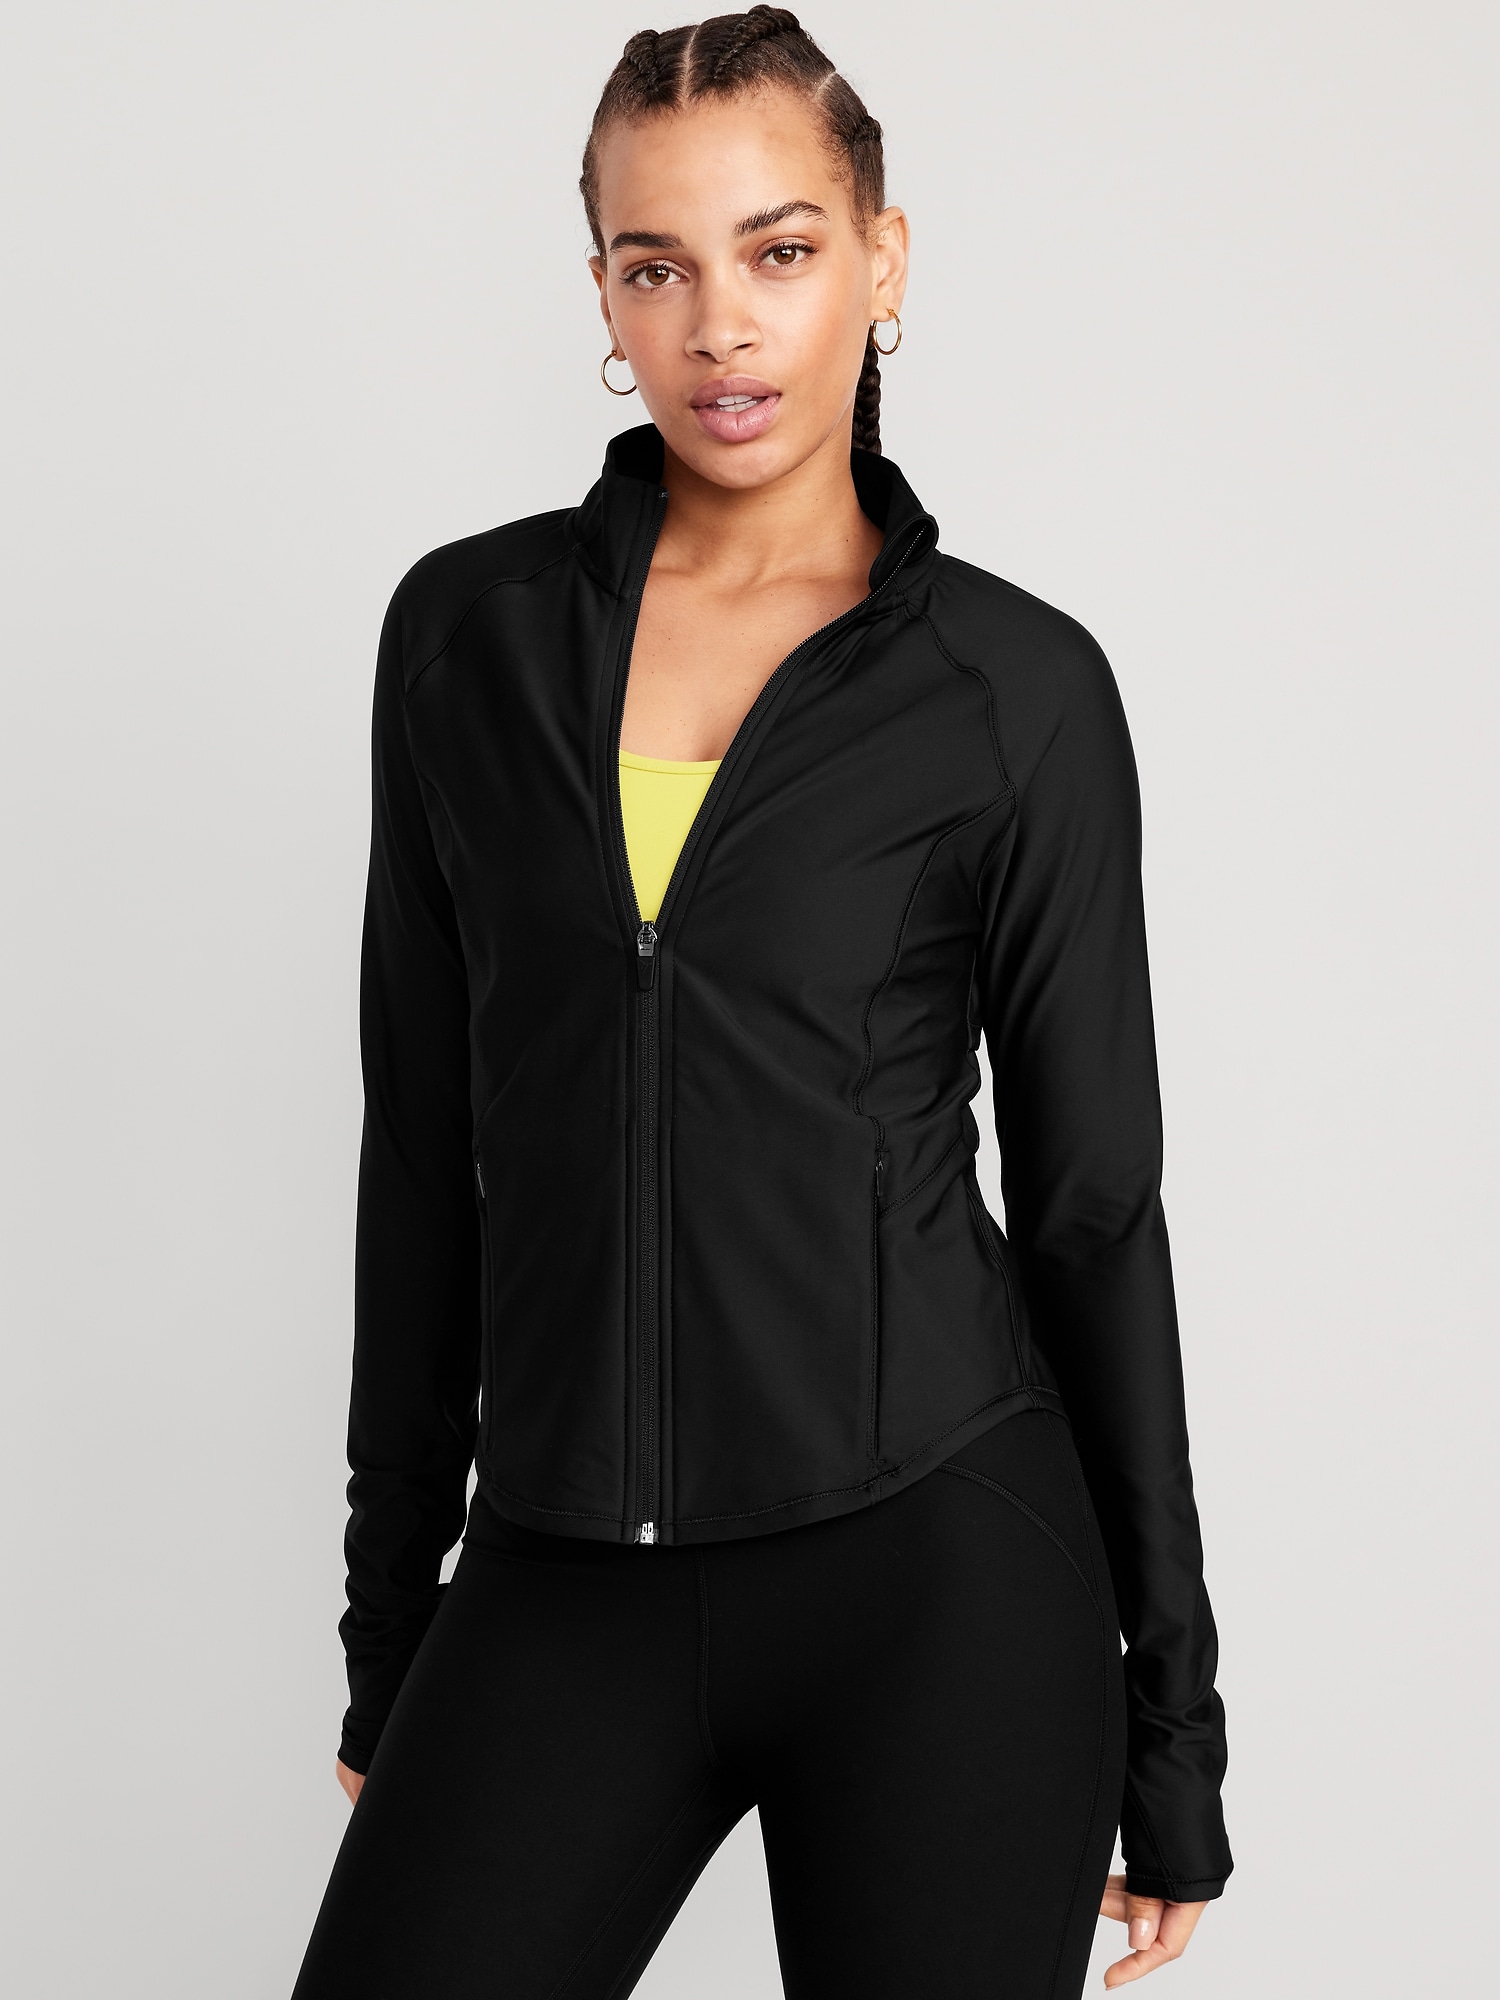 PowerSoft Full-Zip Jacket for Women | Old Navy